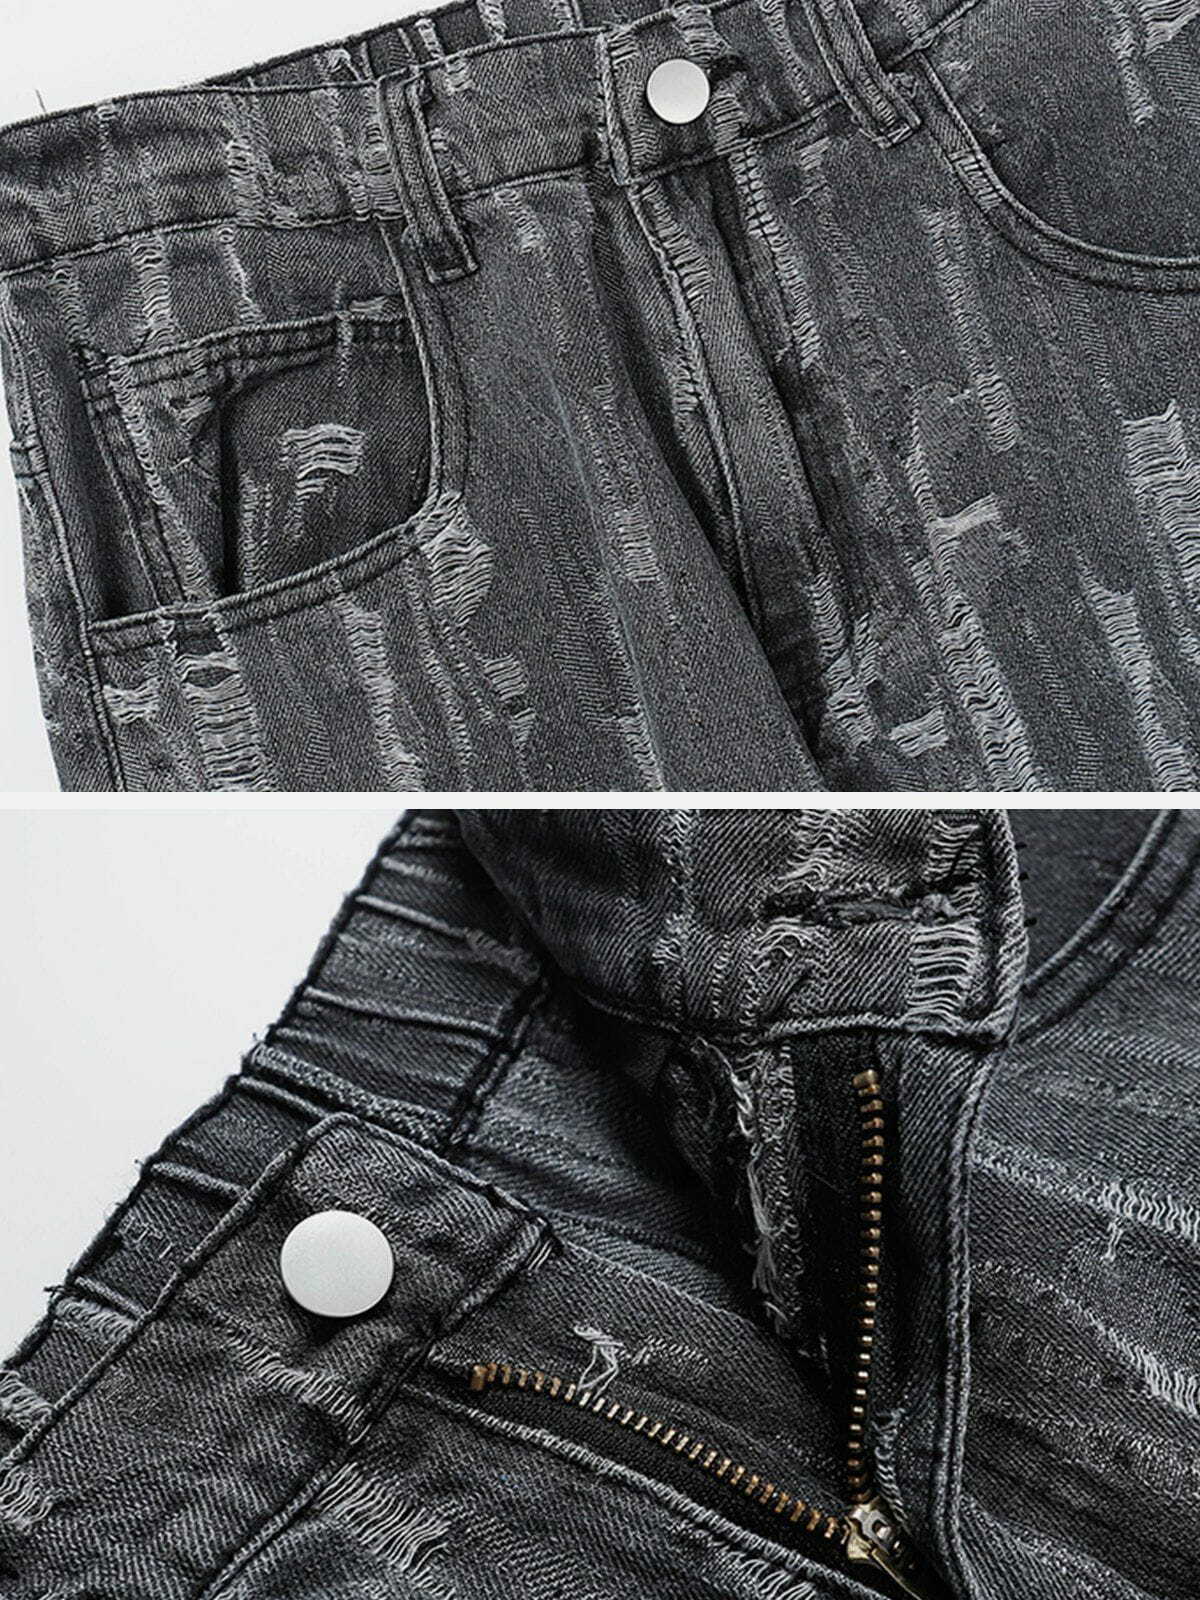 retro scratched jeans edgy & timeless denim 6412